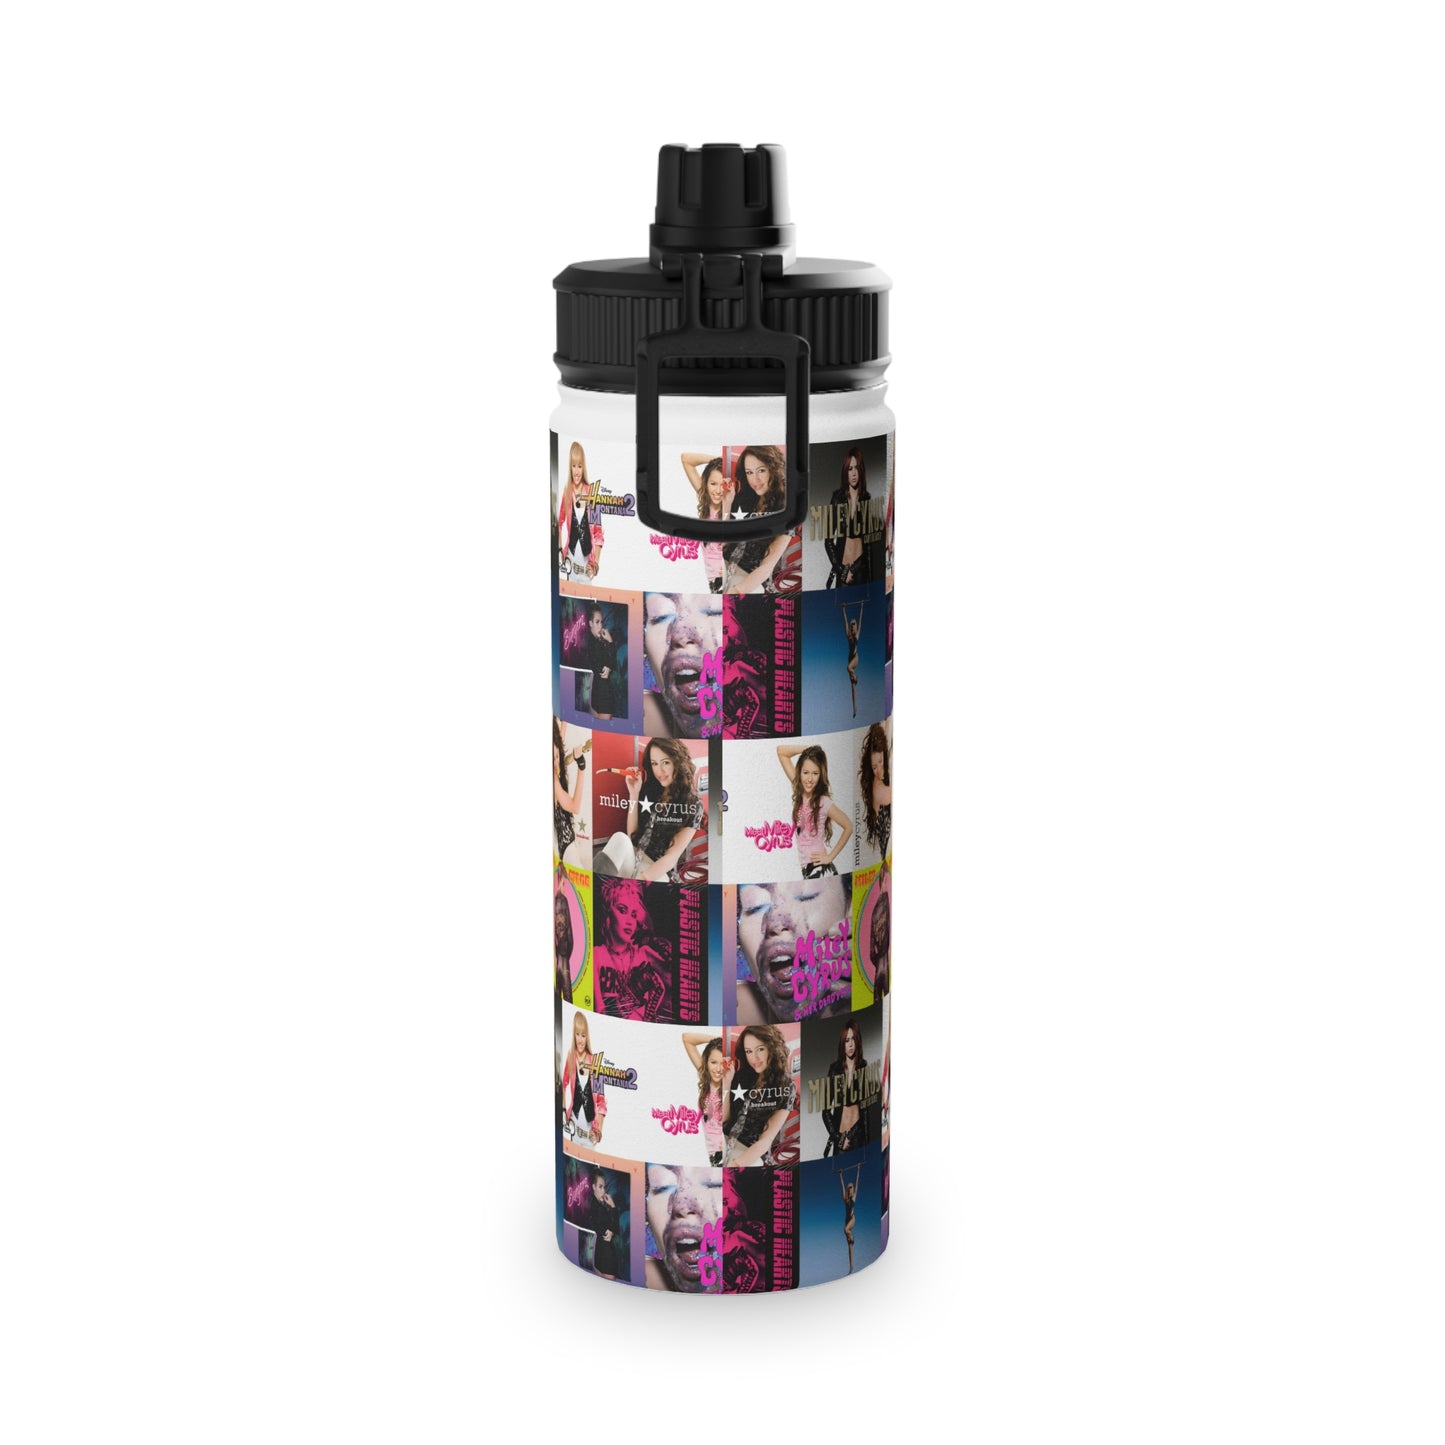 Miley Cyrus Album Cover Collage Stainless Steel Sports Lid Water Bottle